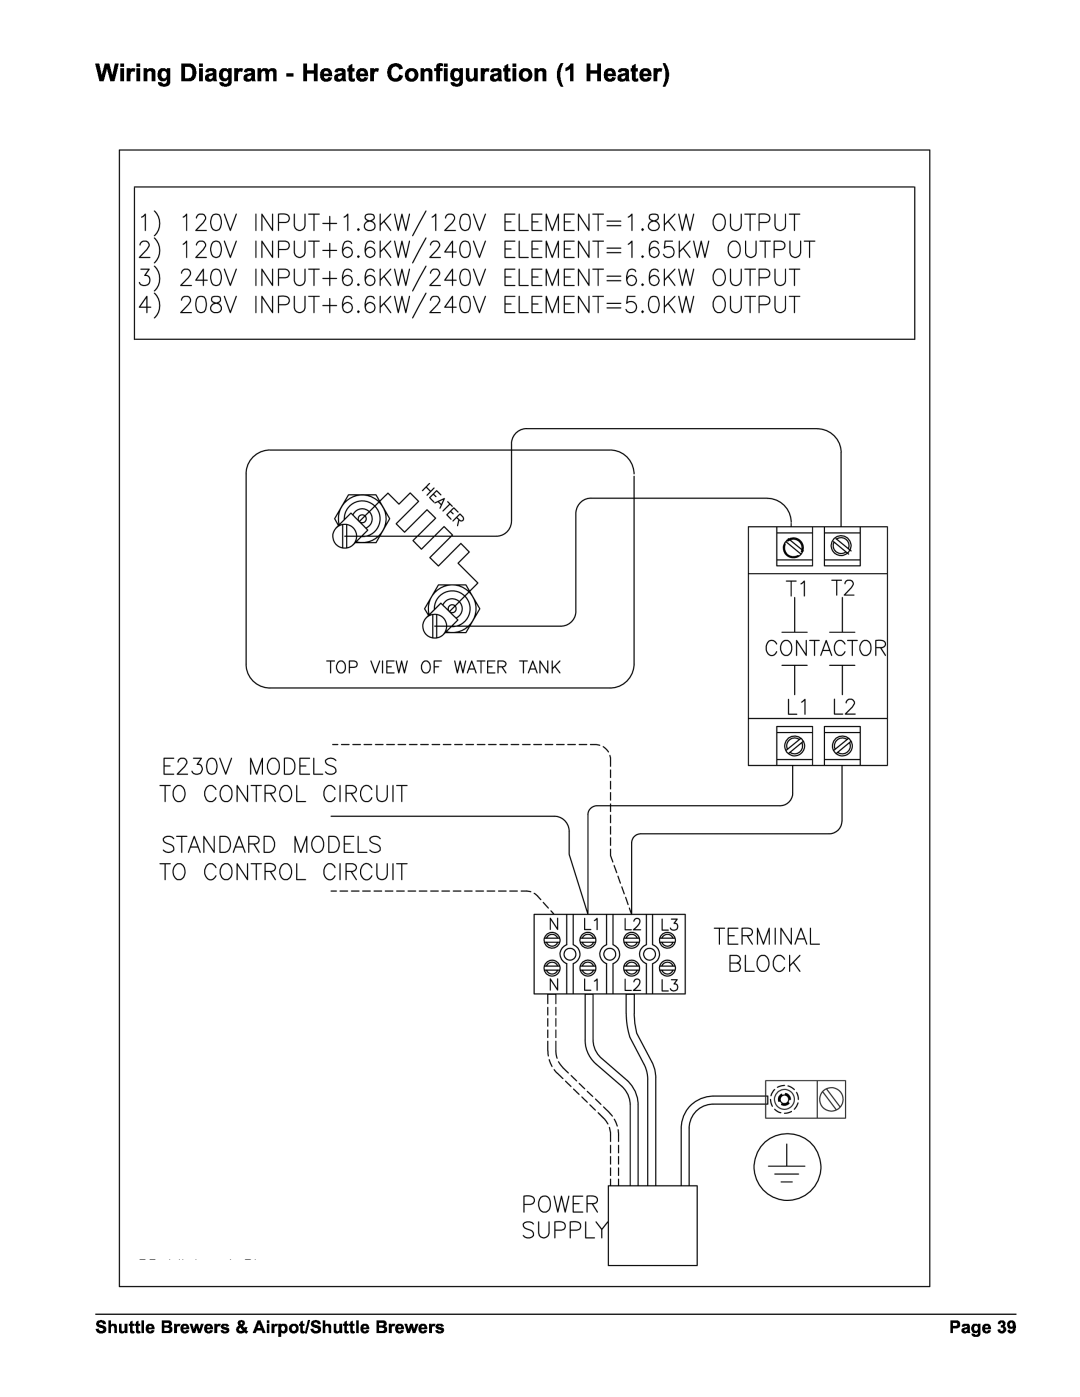 Grindmaster AM-344-04 Wiring Diagram - Heater Configuration 1 Heater, Shuttle Brewers & Airpot/Shuttle Brewers, Page 